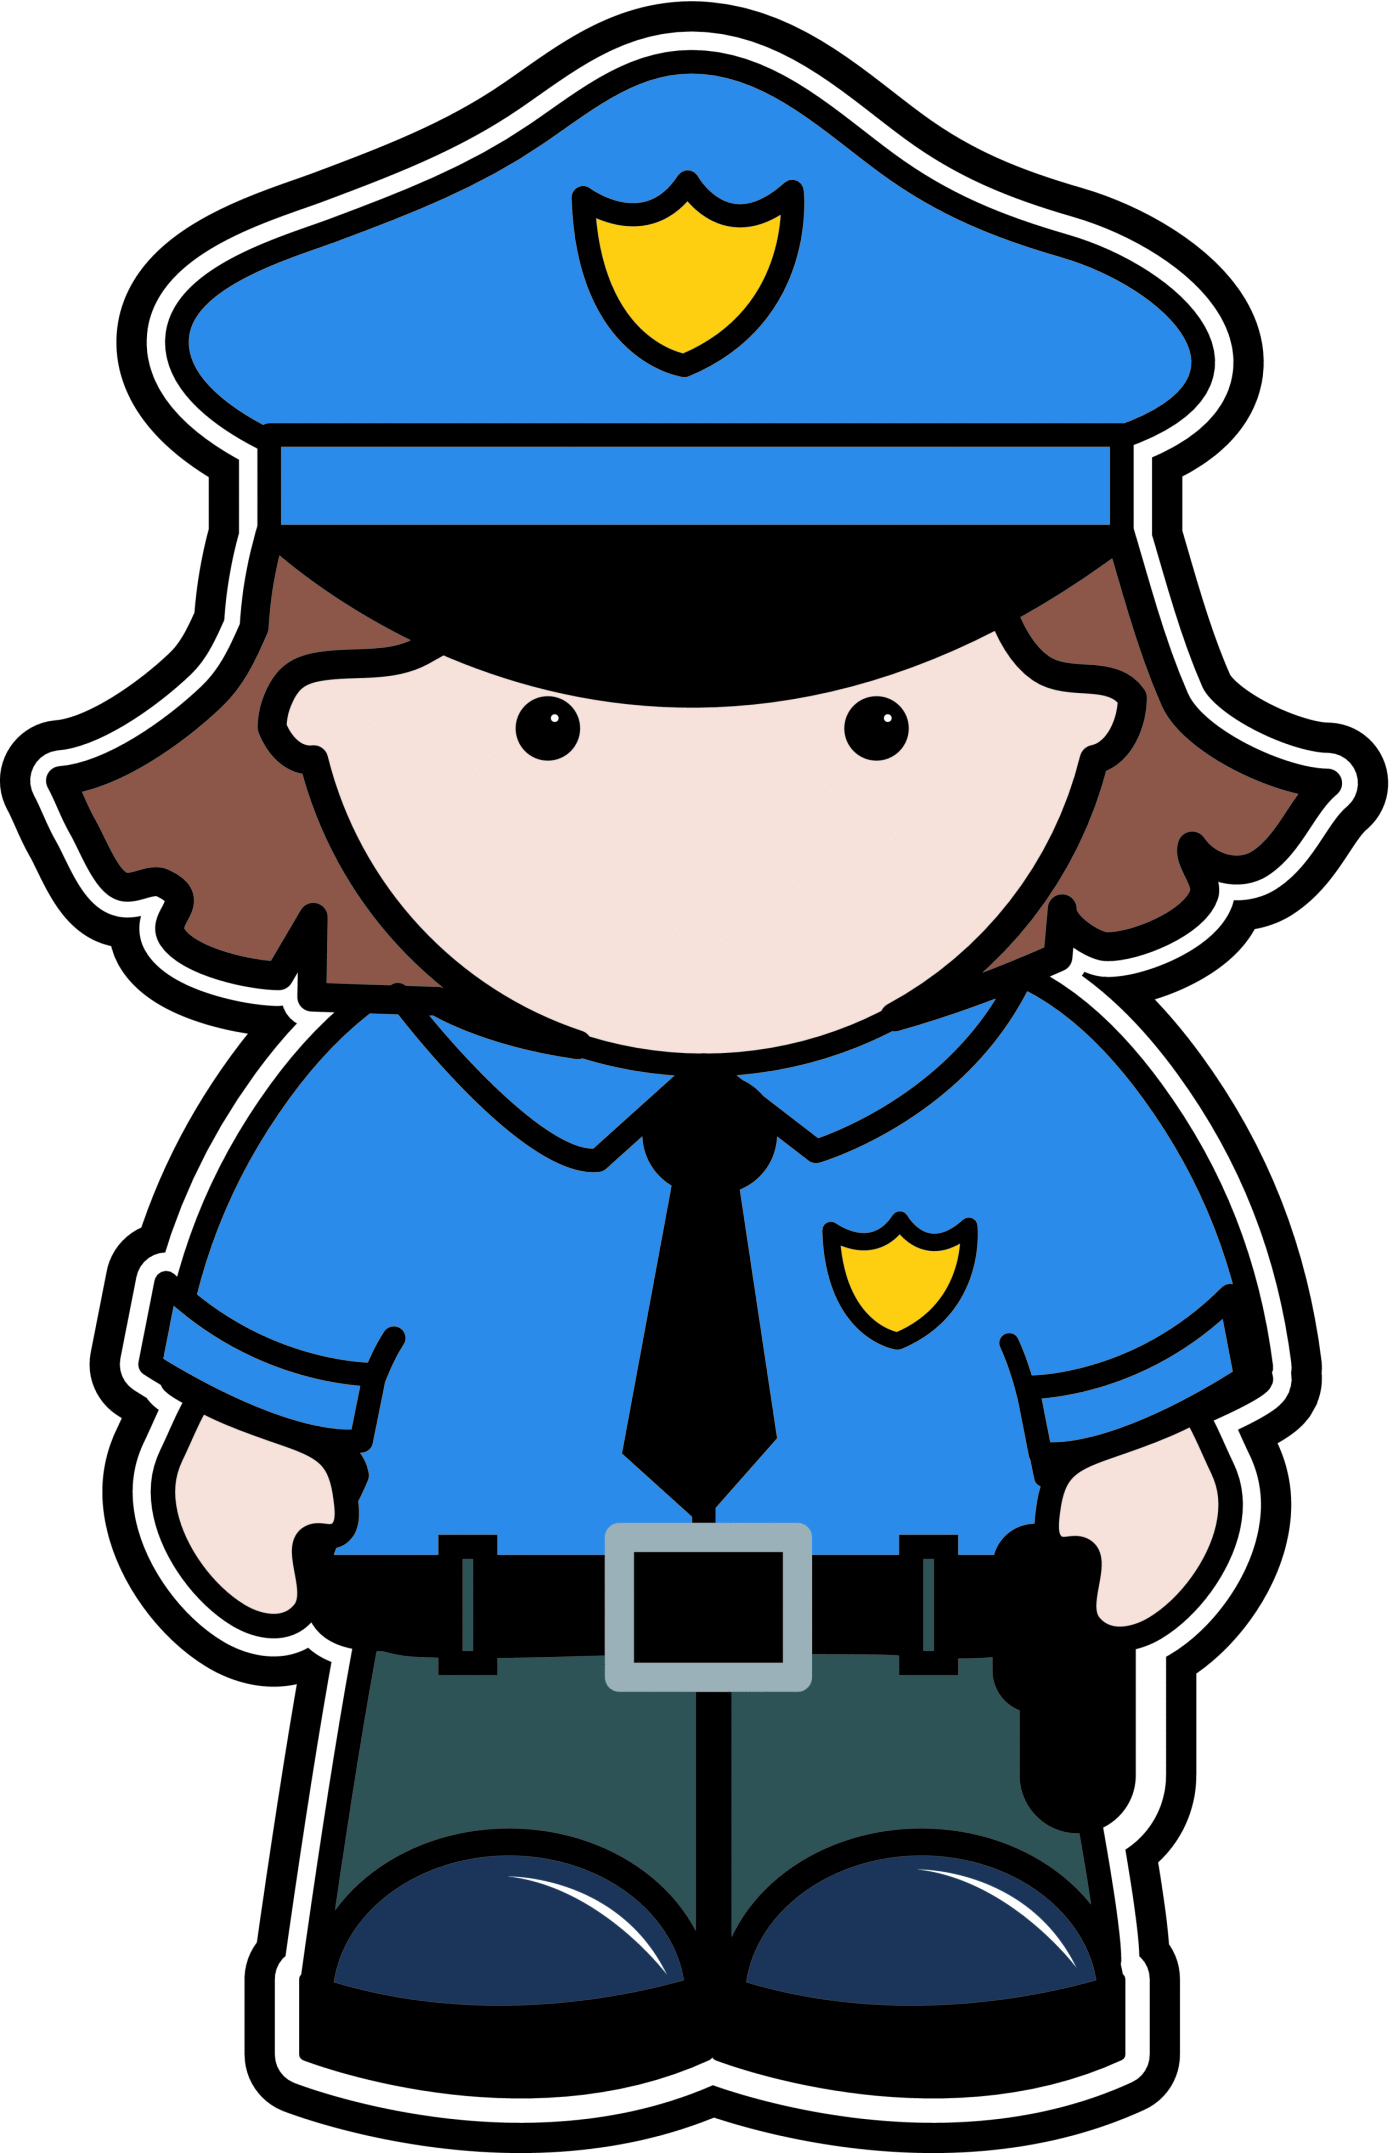 Police Officers Photos - Cliparts.co